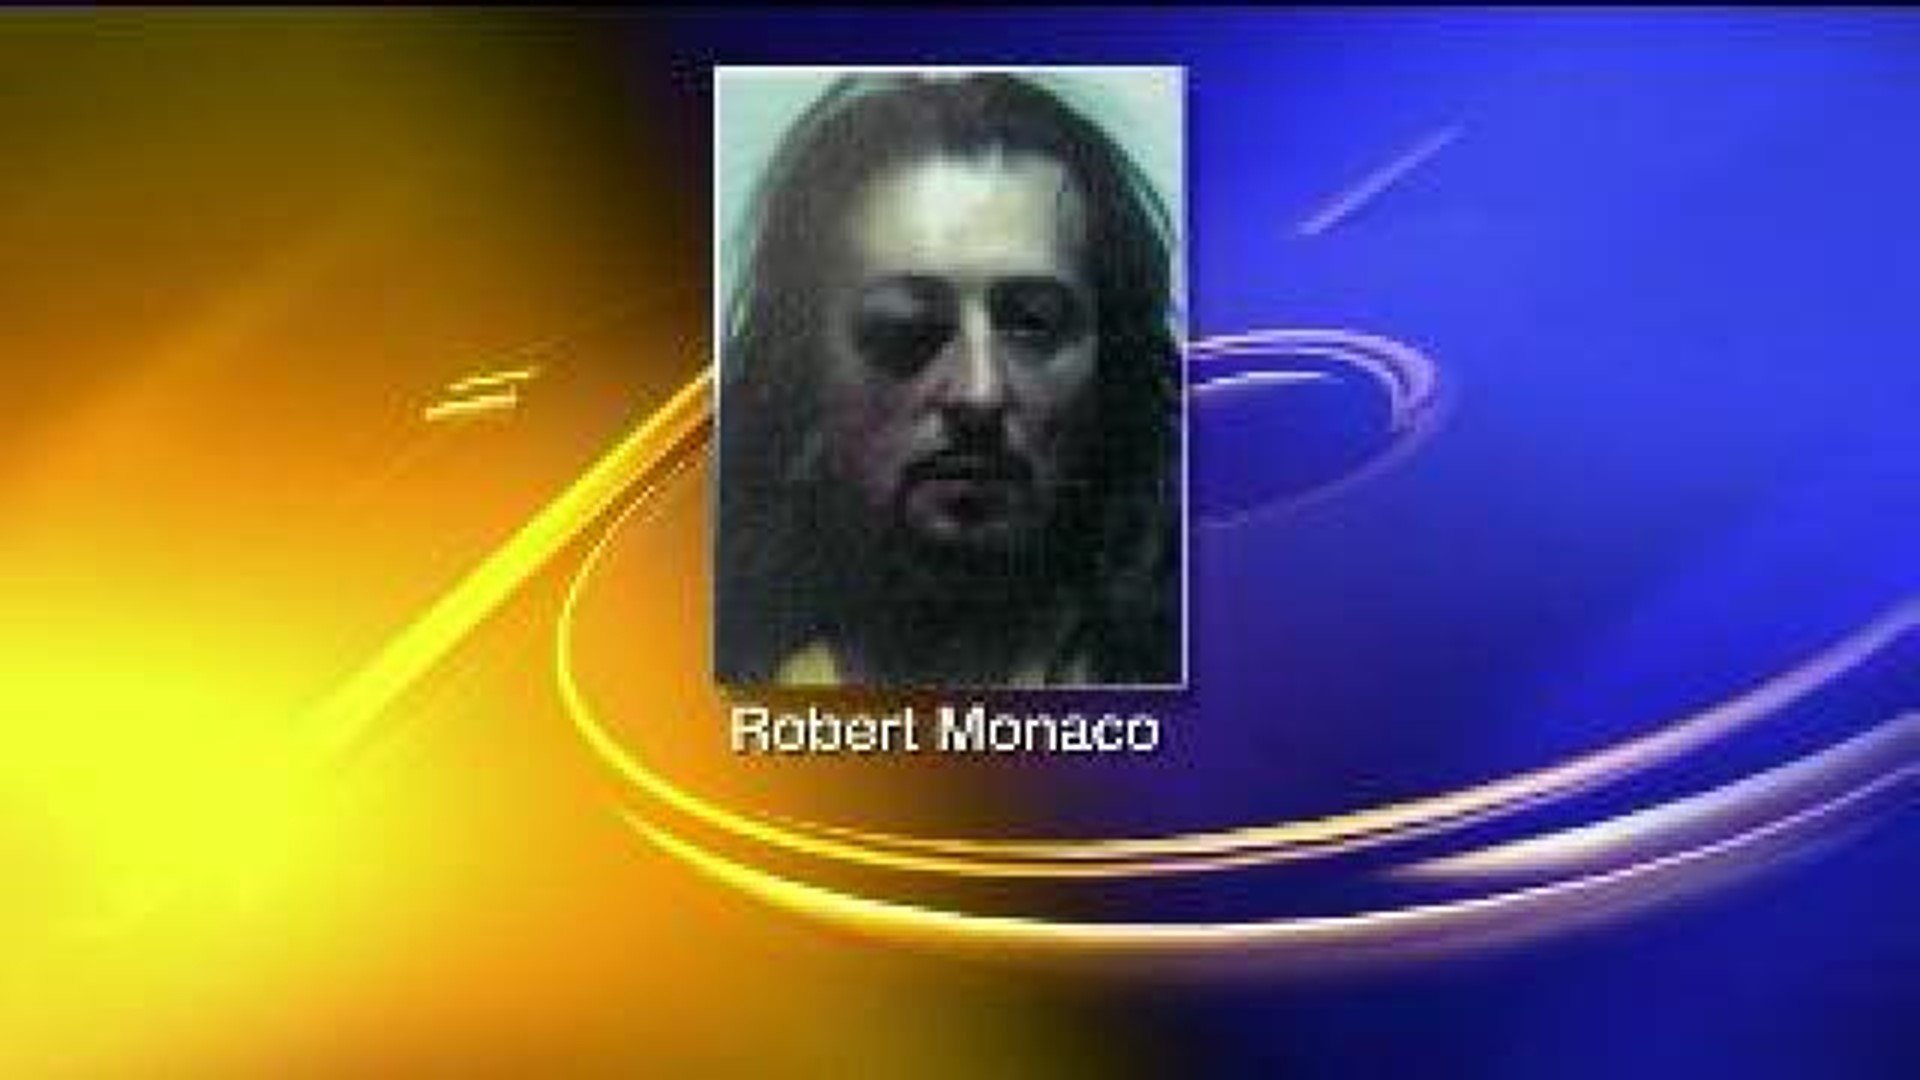 Man Locked up, Accused of Child Luring